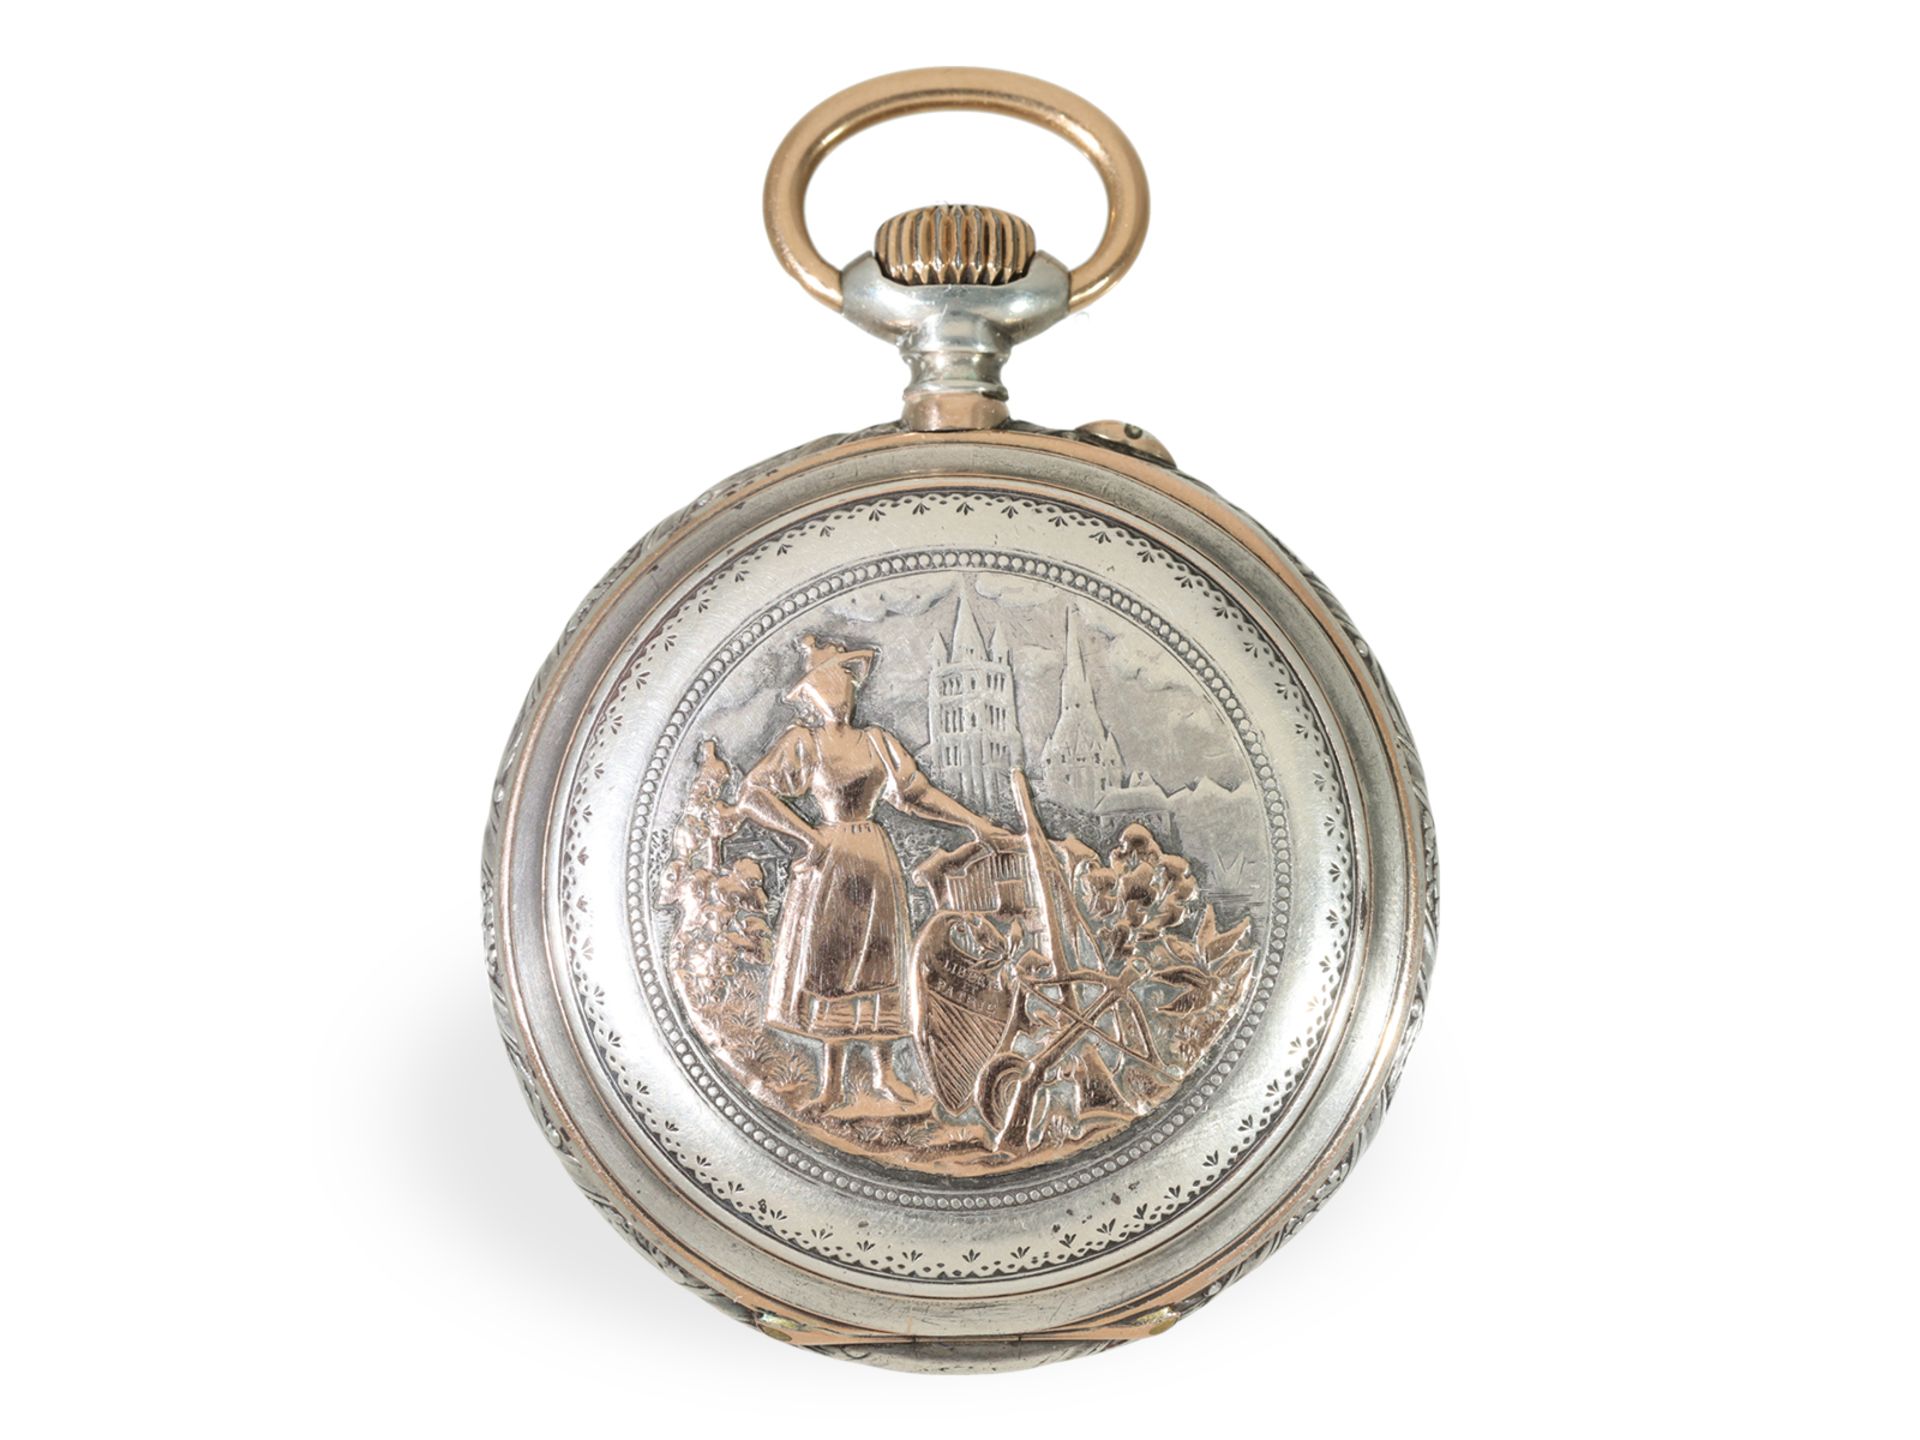 Pocket watch: very rare marksman's watch of fantastic quality, Piguet-Capt Lausanne 1894 - Image 2 of 5